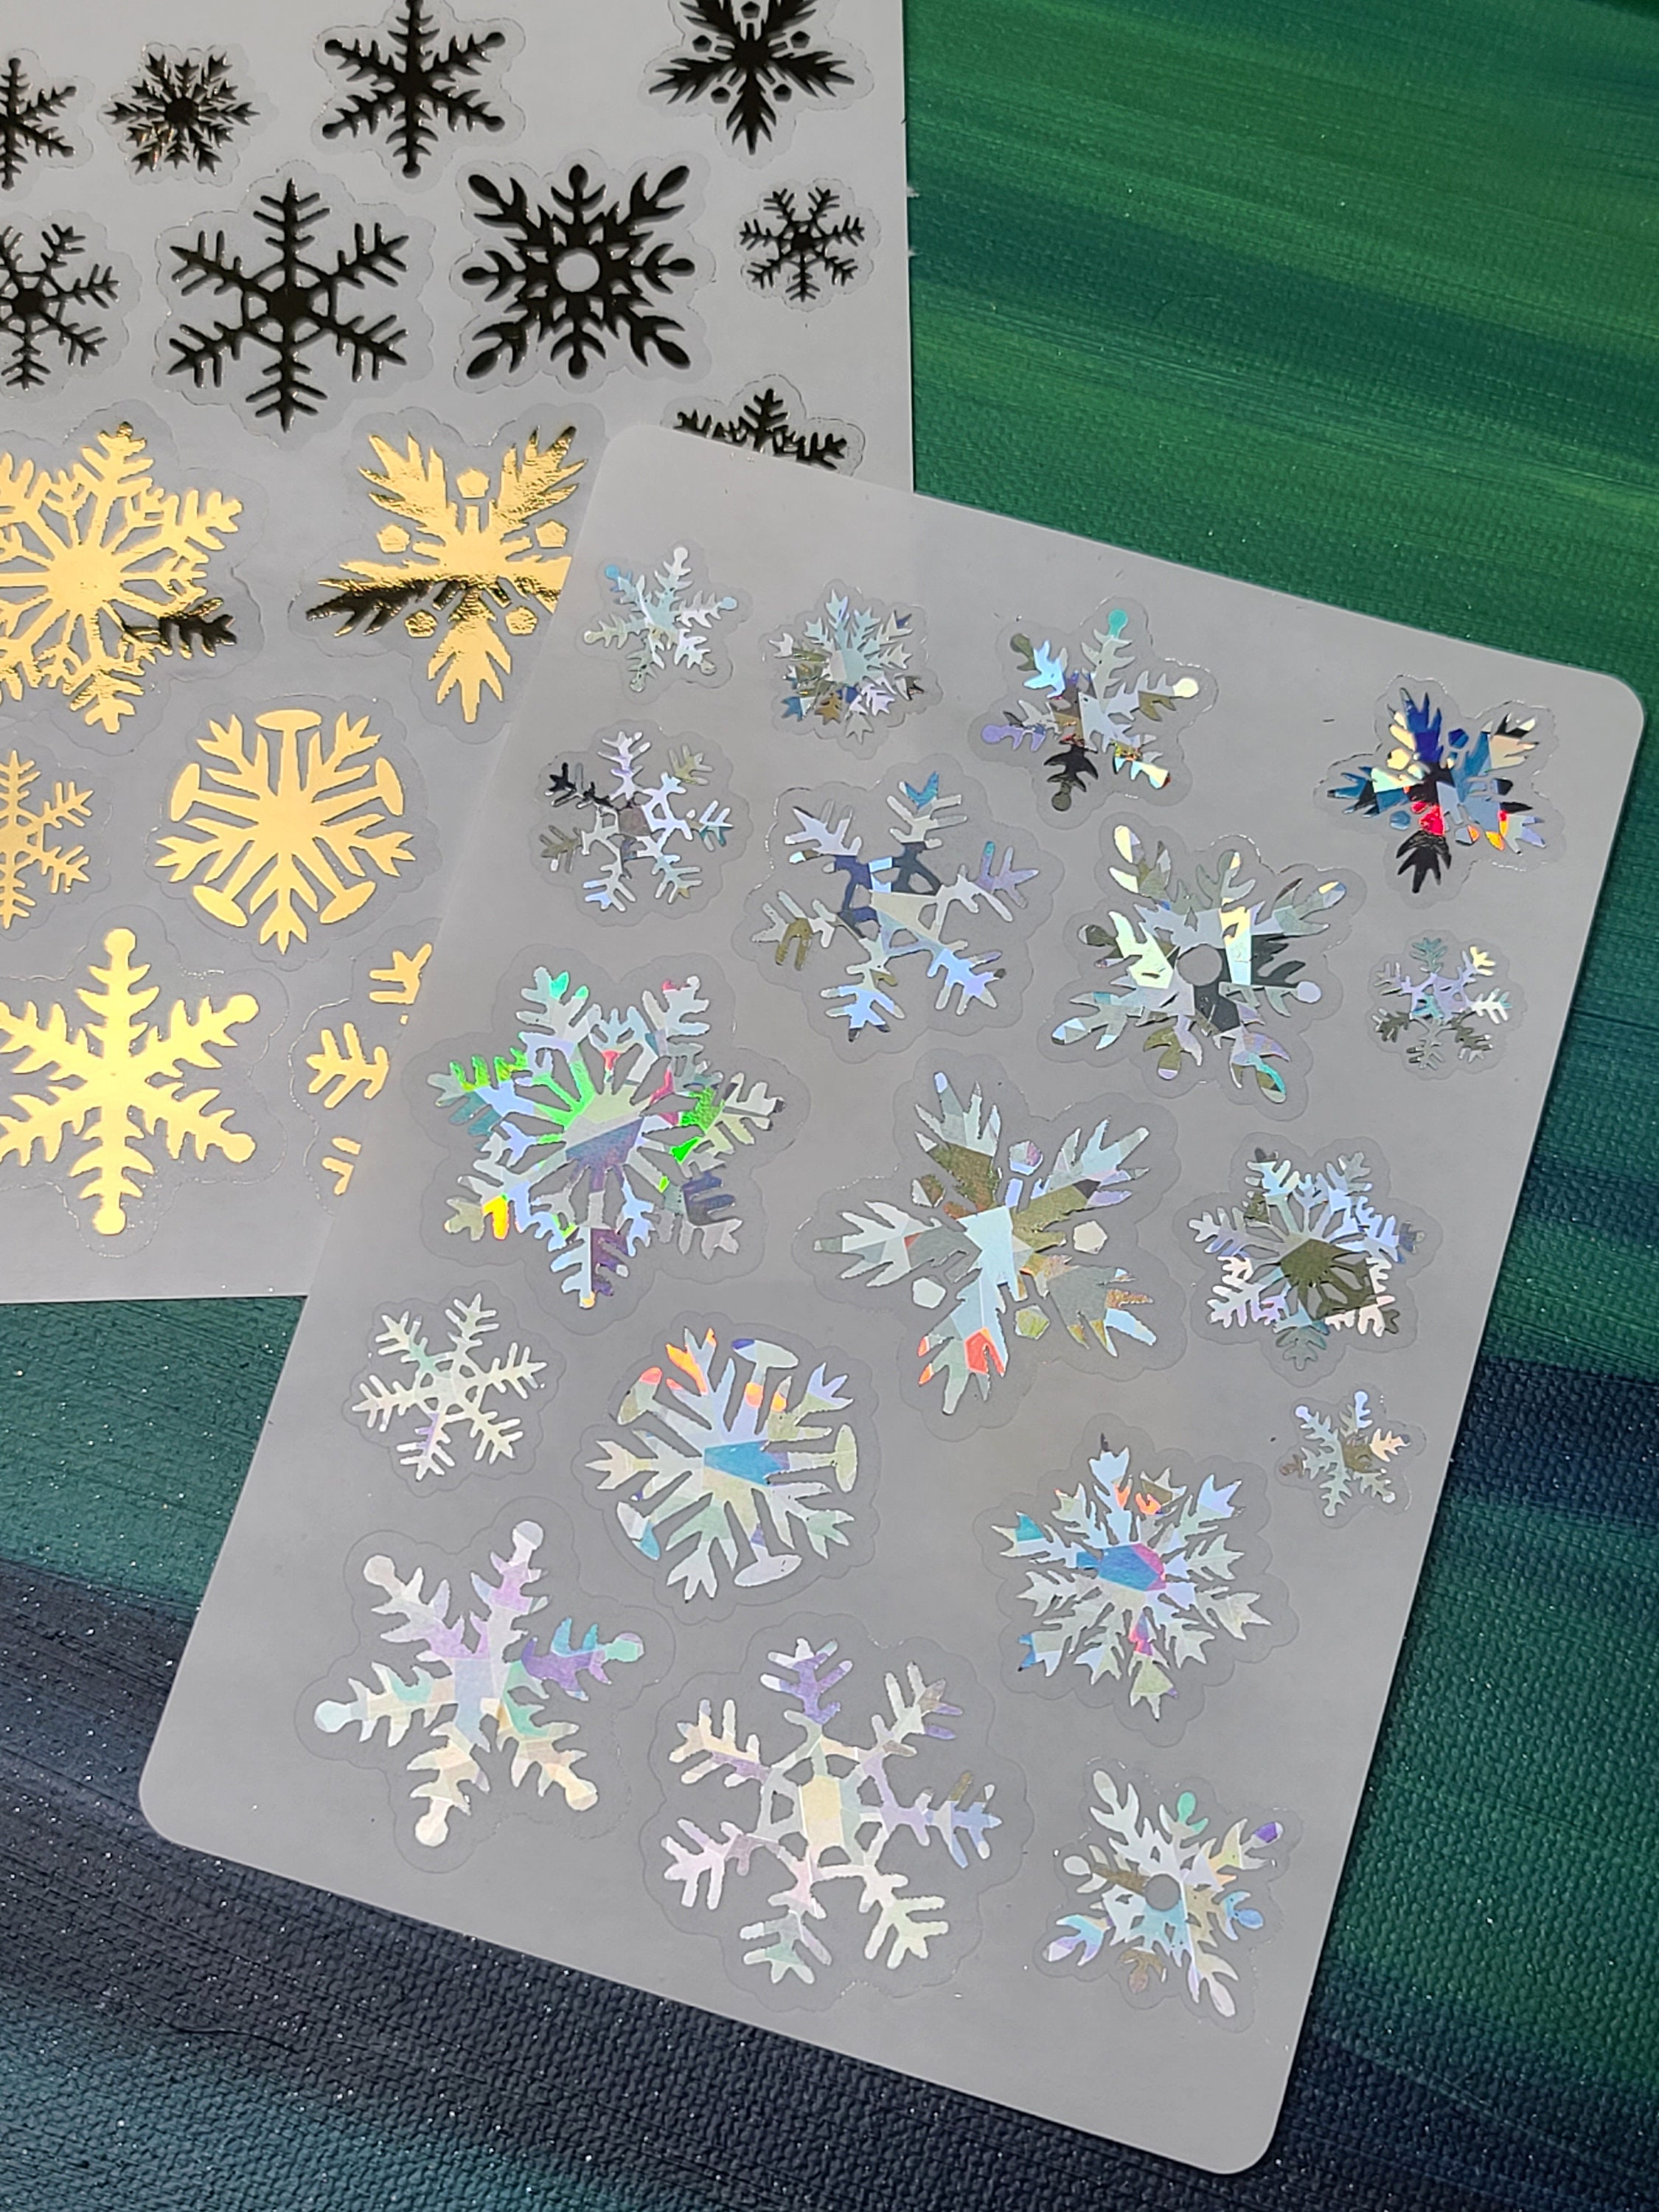 6 X Large Snowflake Rhinestone Stickers Embellishments Sparkly Resin Self  Adhesive Stickers for Crafts Christmas Cards 